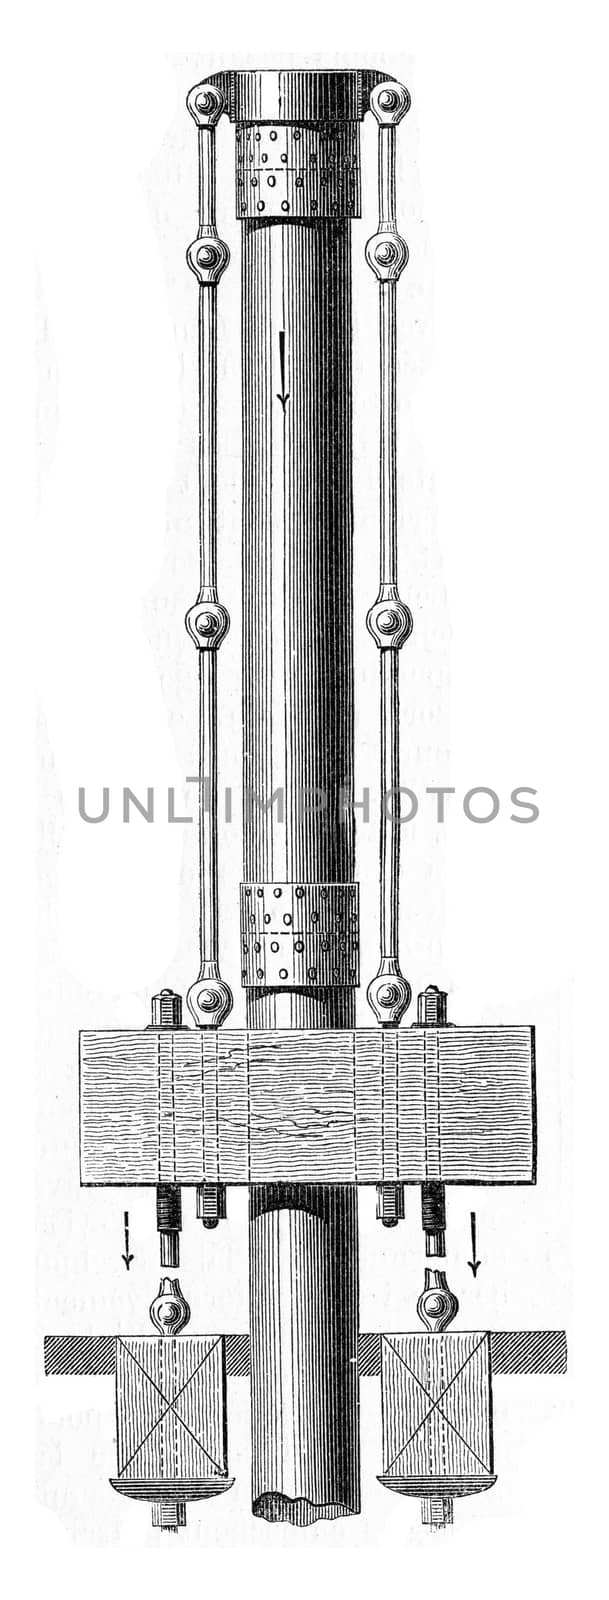 Casing of wells drilled. Layout used for driving tubes by pulling, vintage engraved illustration. Industrial encyclopedia E.-O. Lami - 1875.
